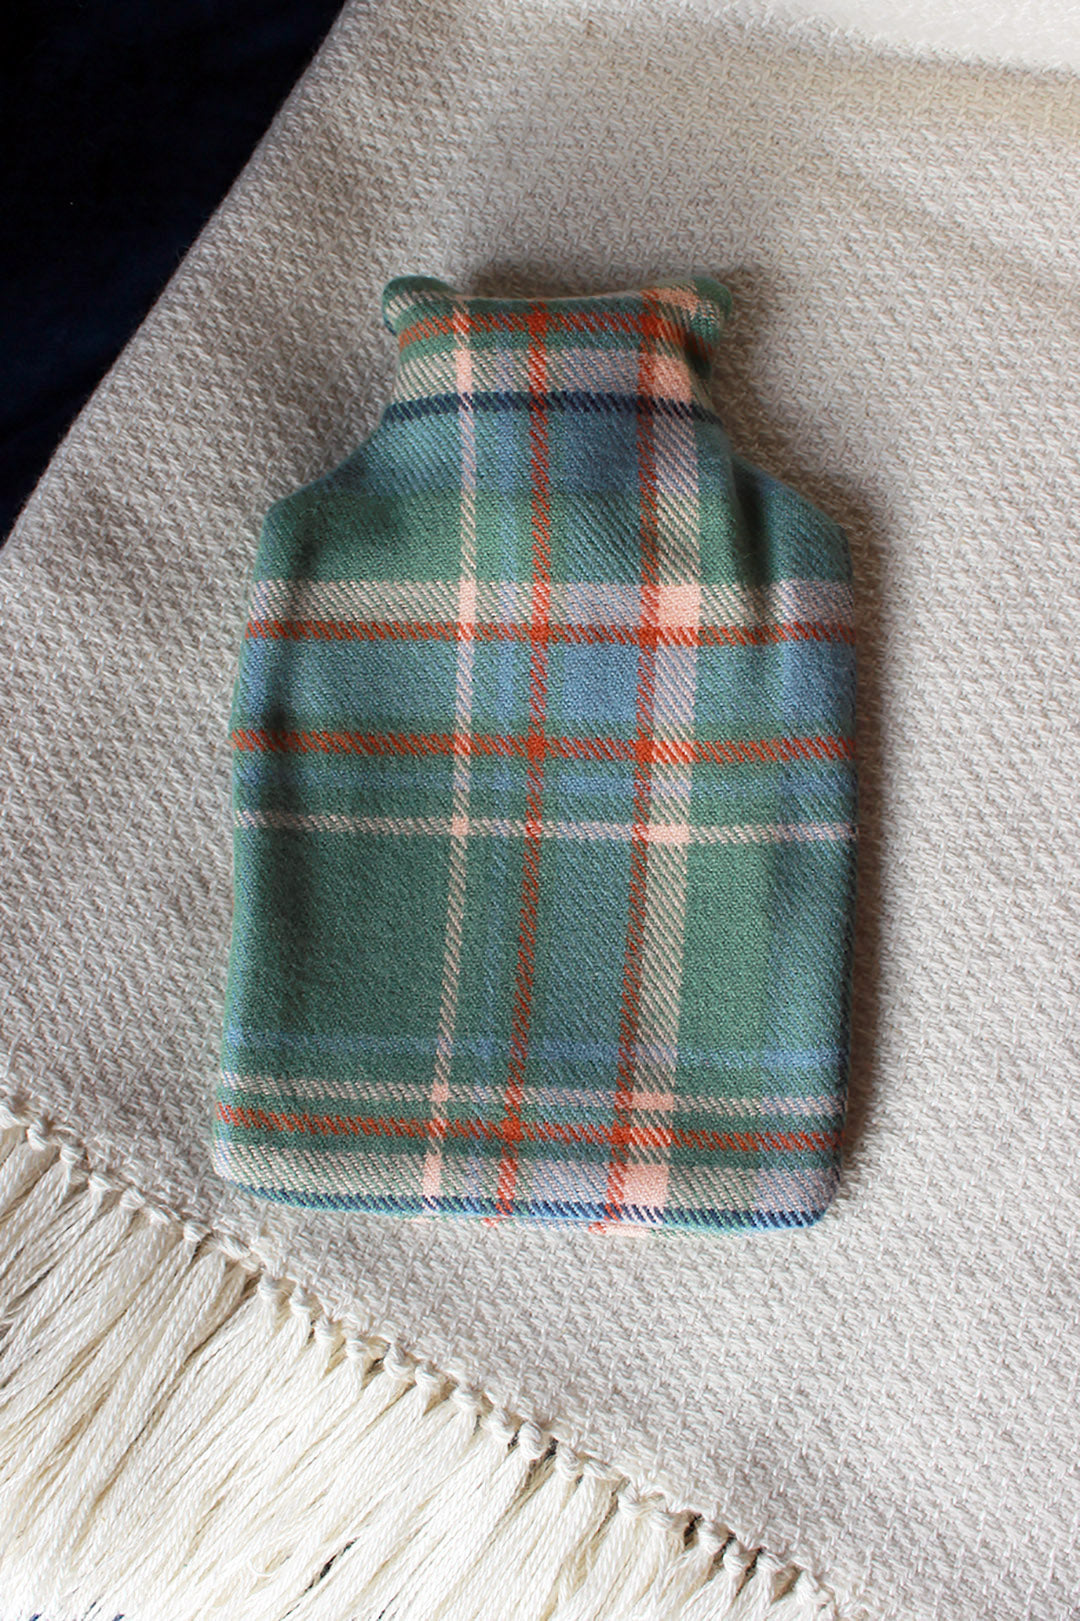 Snuggle up with our limited edition Araminta Campbell Highlands at Dawn tartan hot water bottle